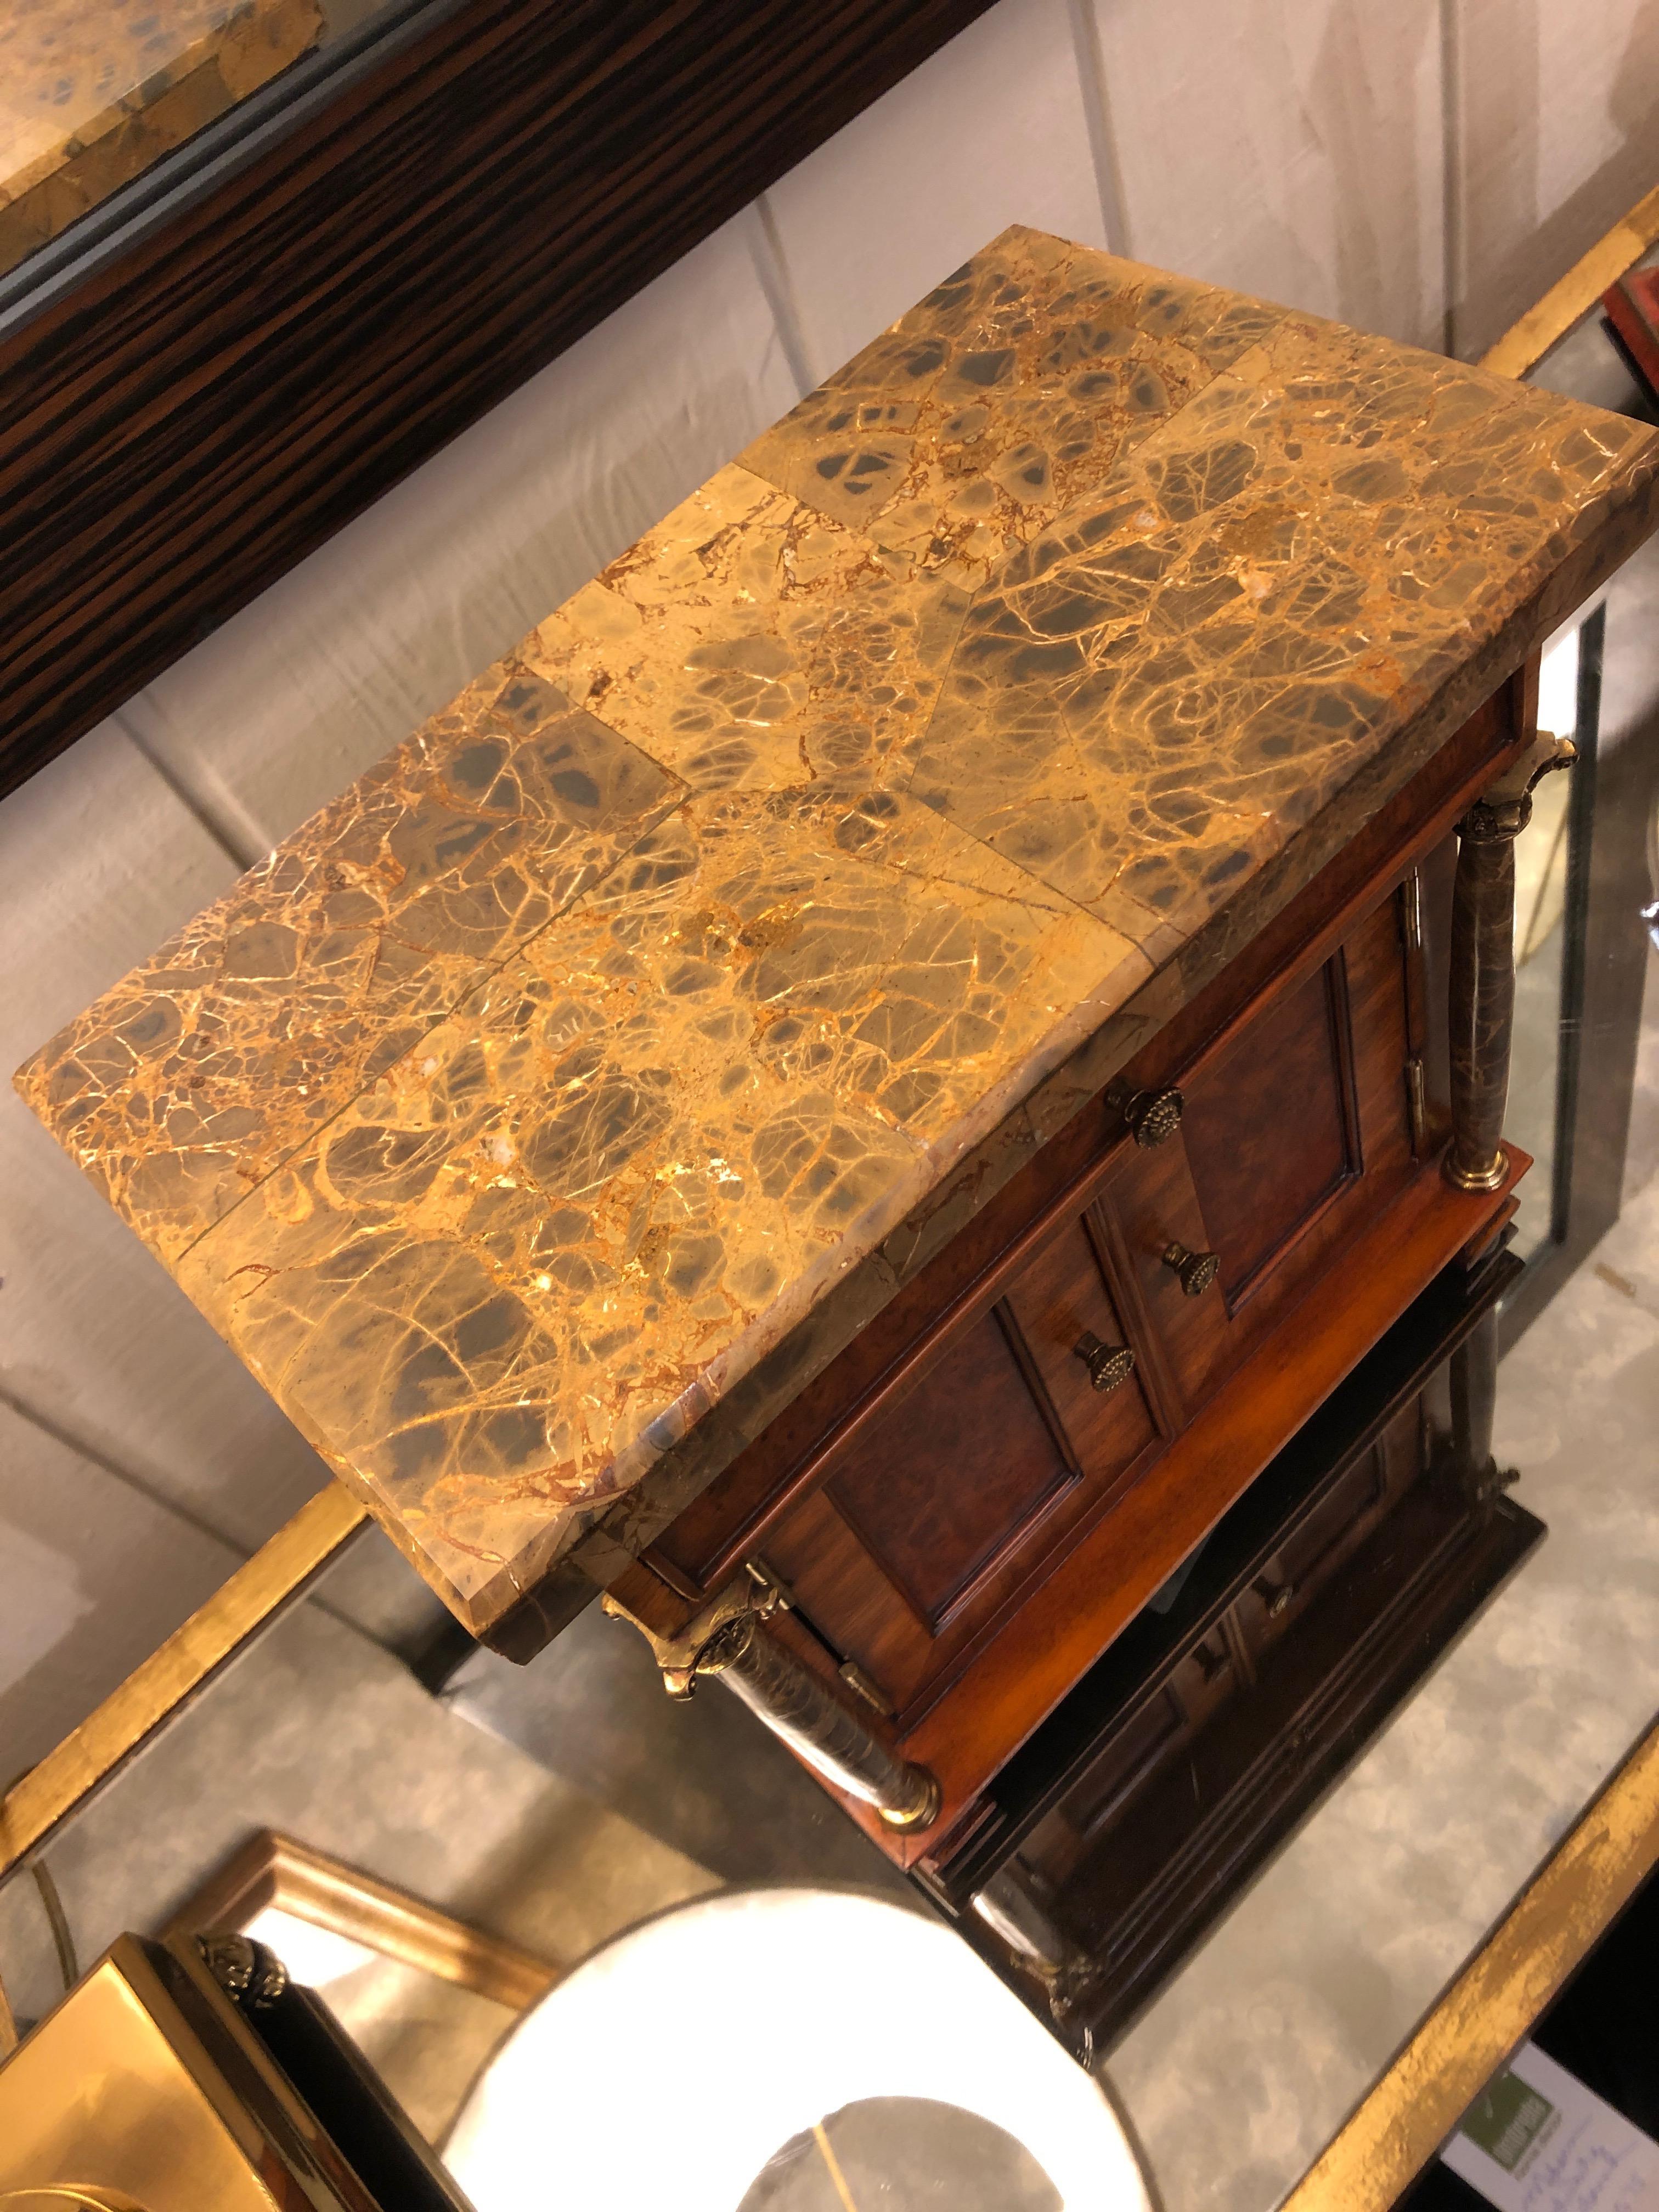 A gorgeous jewelry box or container for treasures in the shape of an antique mini credenza having a mix of burled walnut and fruitwood, marble top and decorative columns, brass embellishments, a single drawer and double doors that open to reveal